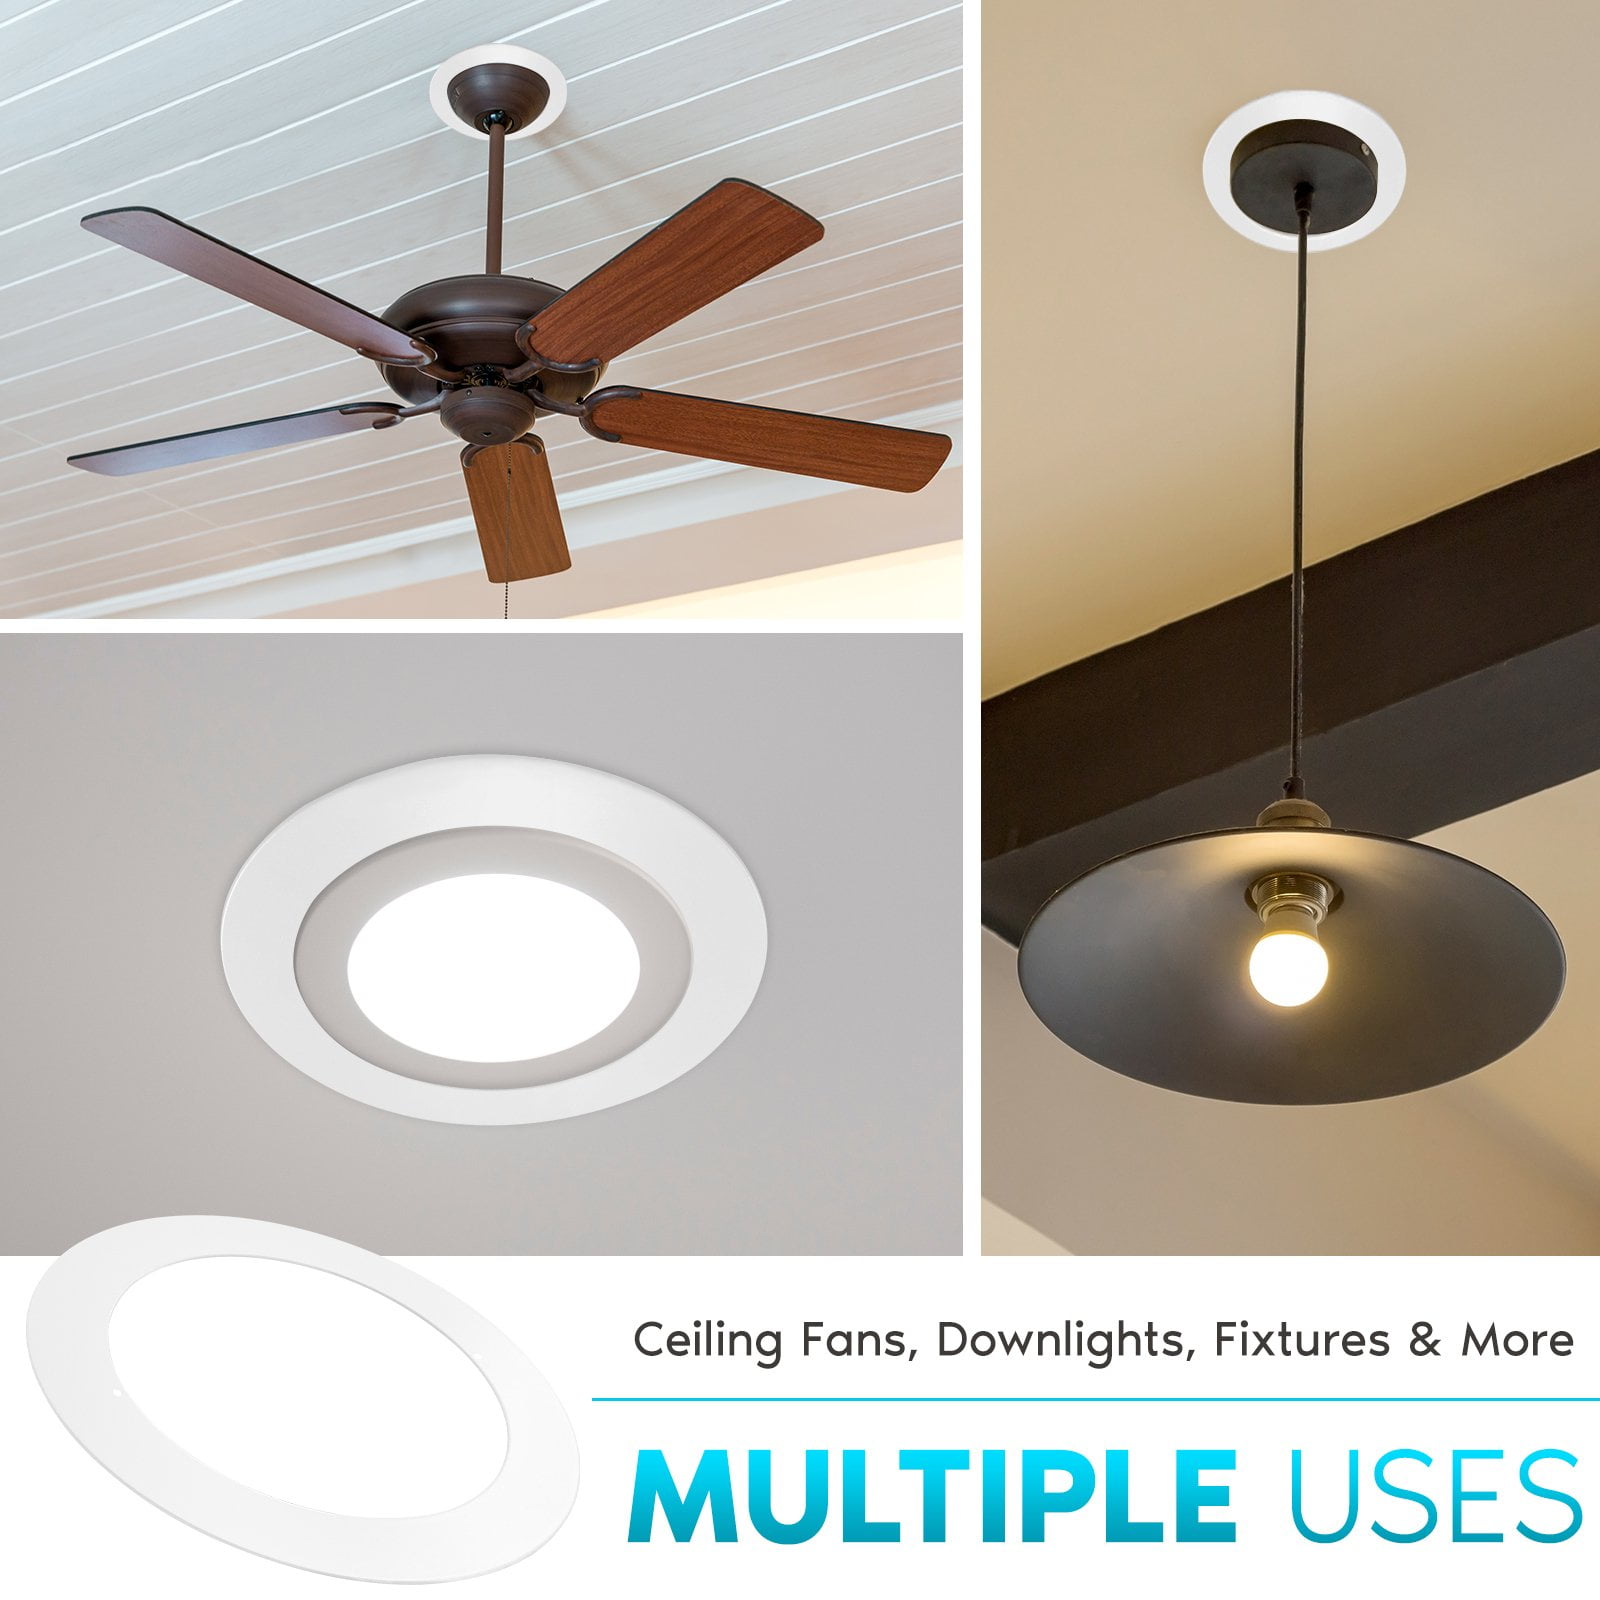 Hunter Fans | How To Install Your Ceiling Fan | CPO Hunter | CPO Outlets